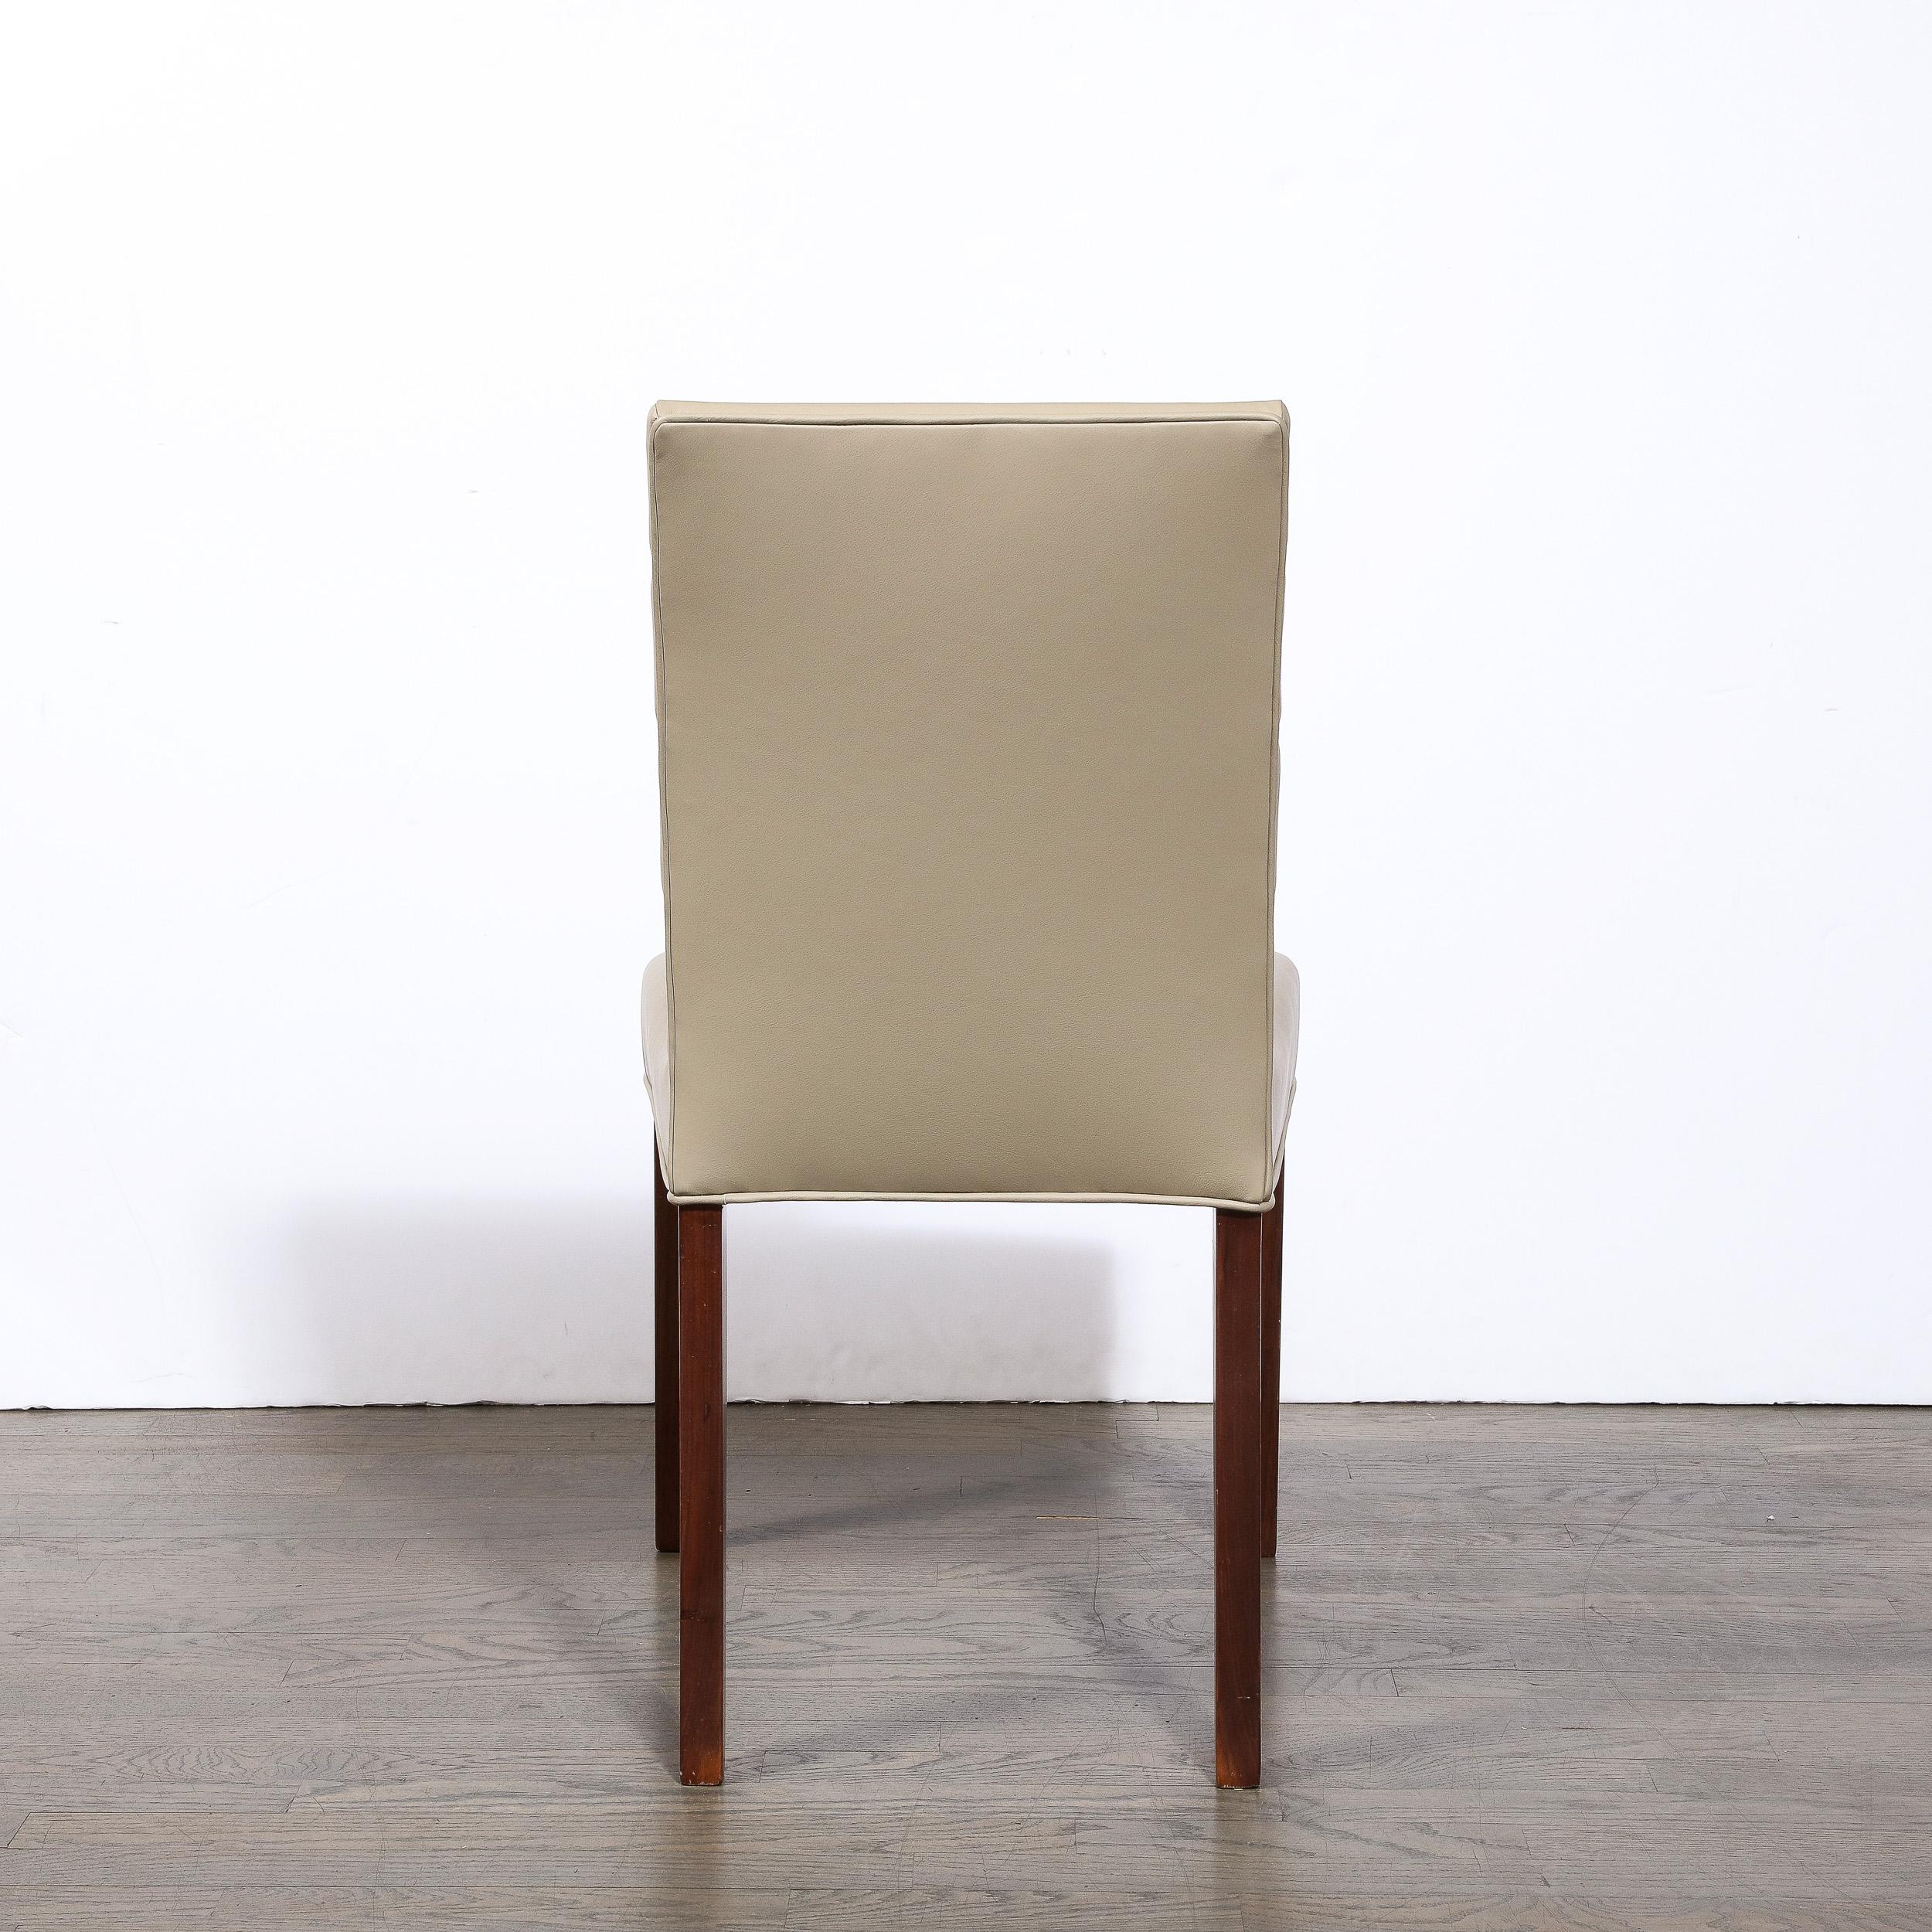 Art Deco Gilbert Rohde Chair in Holly Hunt Leather w/ Tufted Back & Walnut Legs For Sale 3